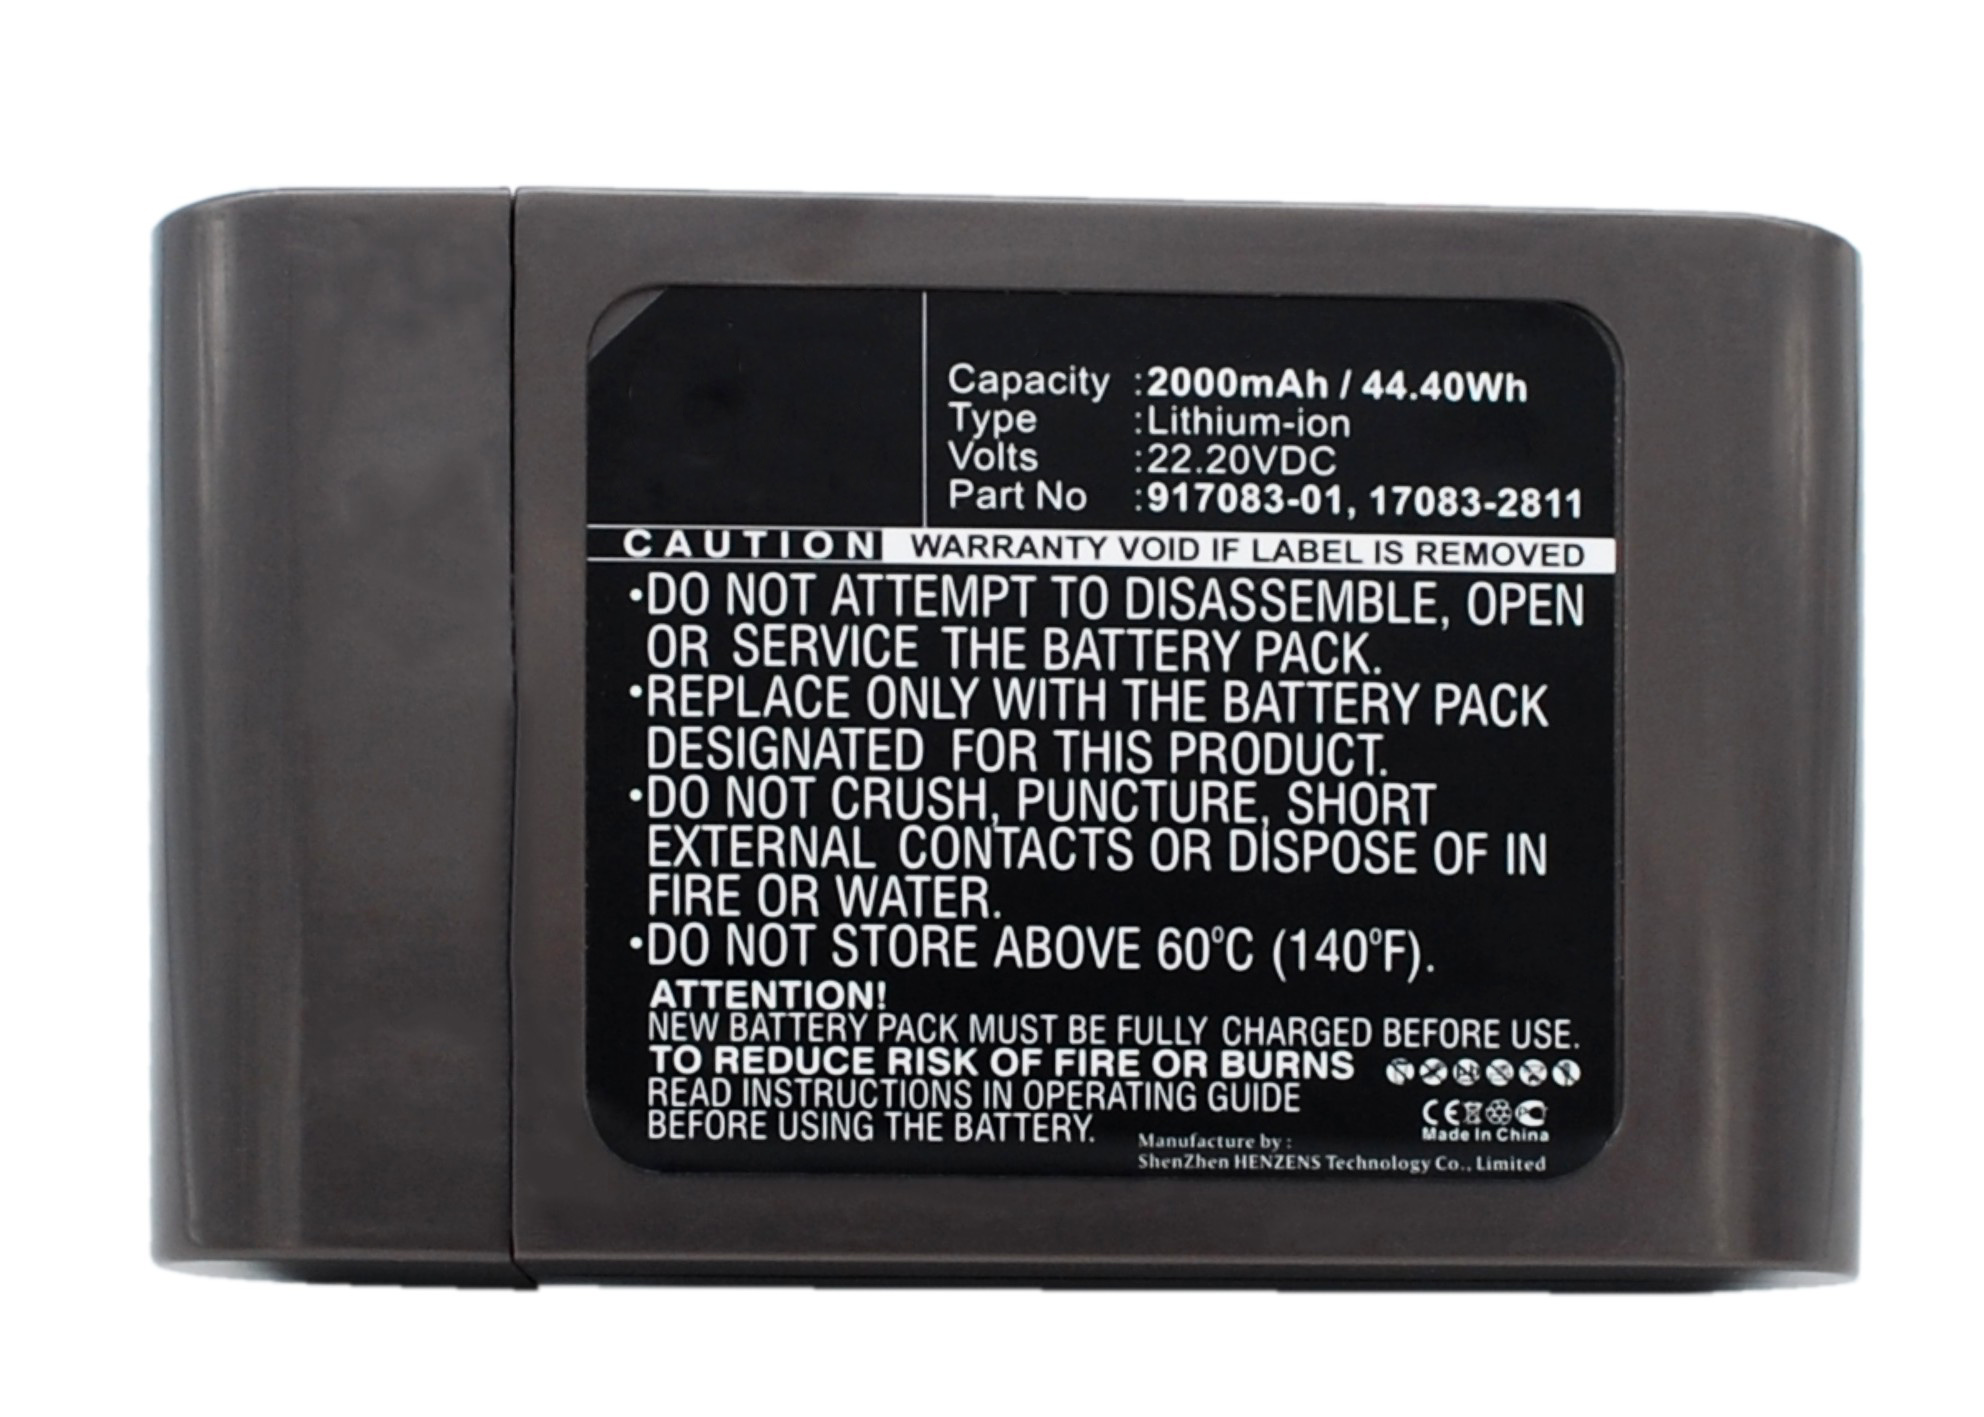 Synergy Digital Battery Compatible With Dyson 17083-2811 Vacuum Cleaner Battery - (Li-Ion, 22.2V, 2000 mAh)